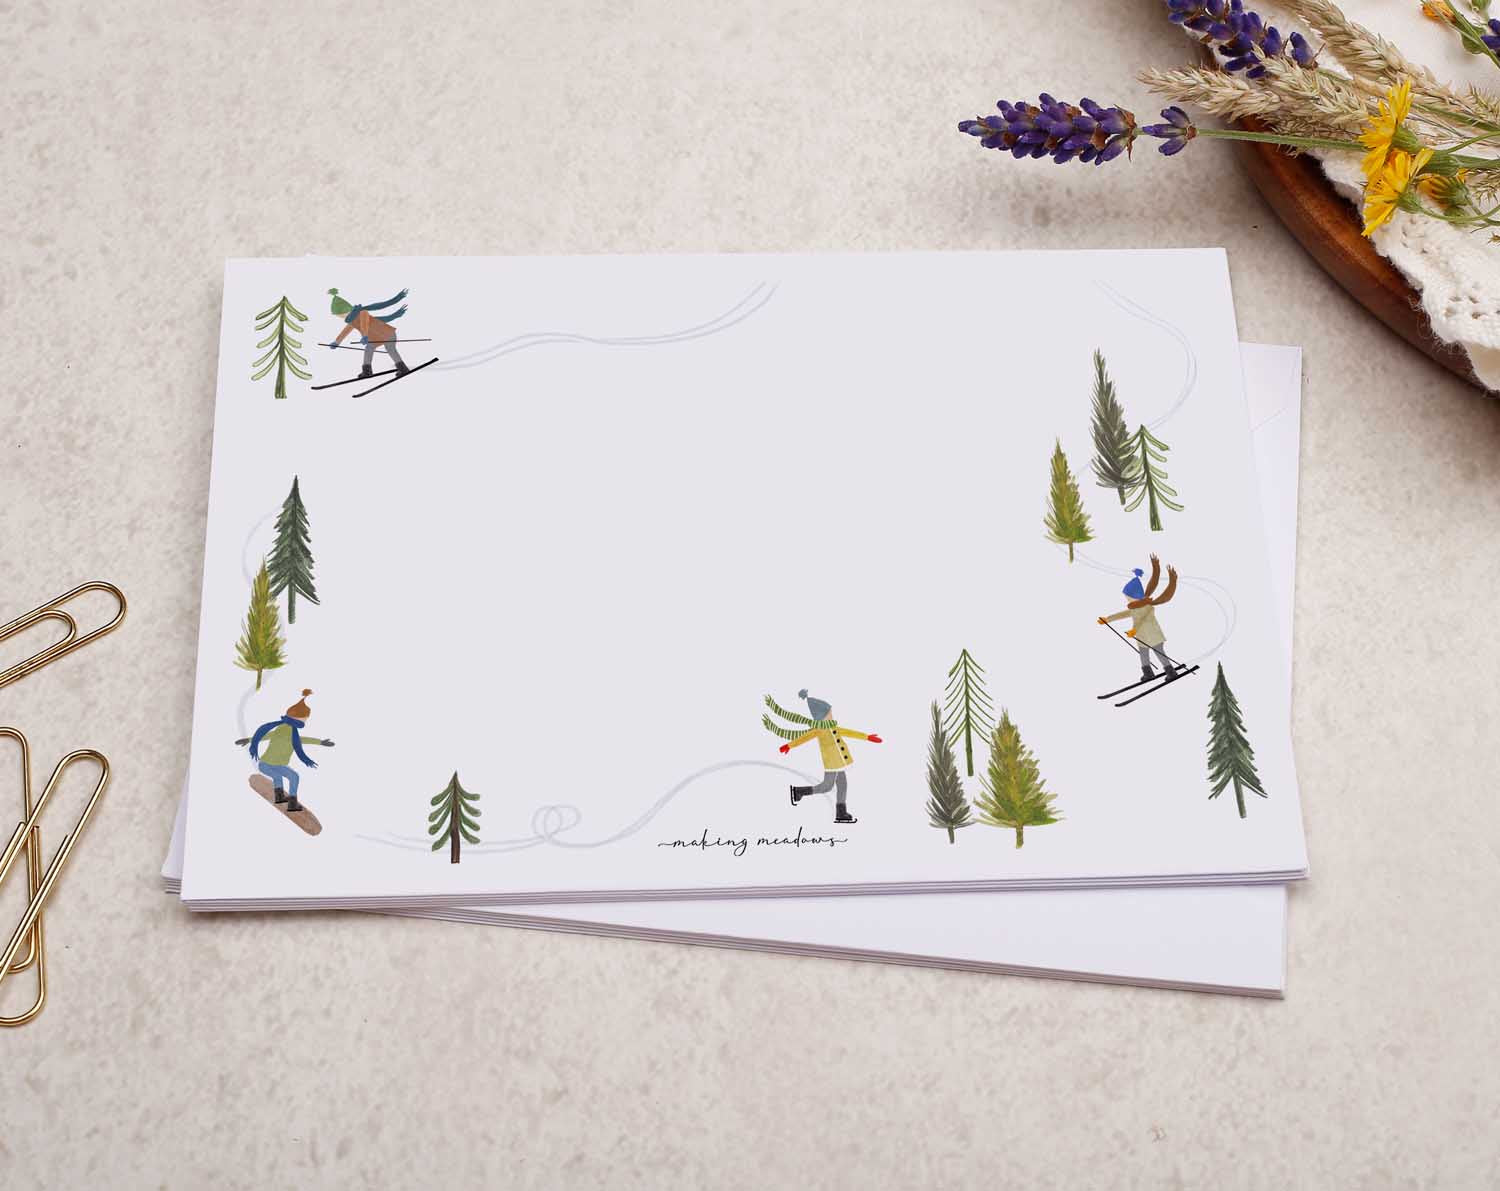 A pretty decorated C6 white envelope with a Winter Snow Skiing & Snowboarding Design.